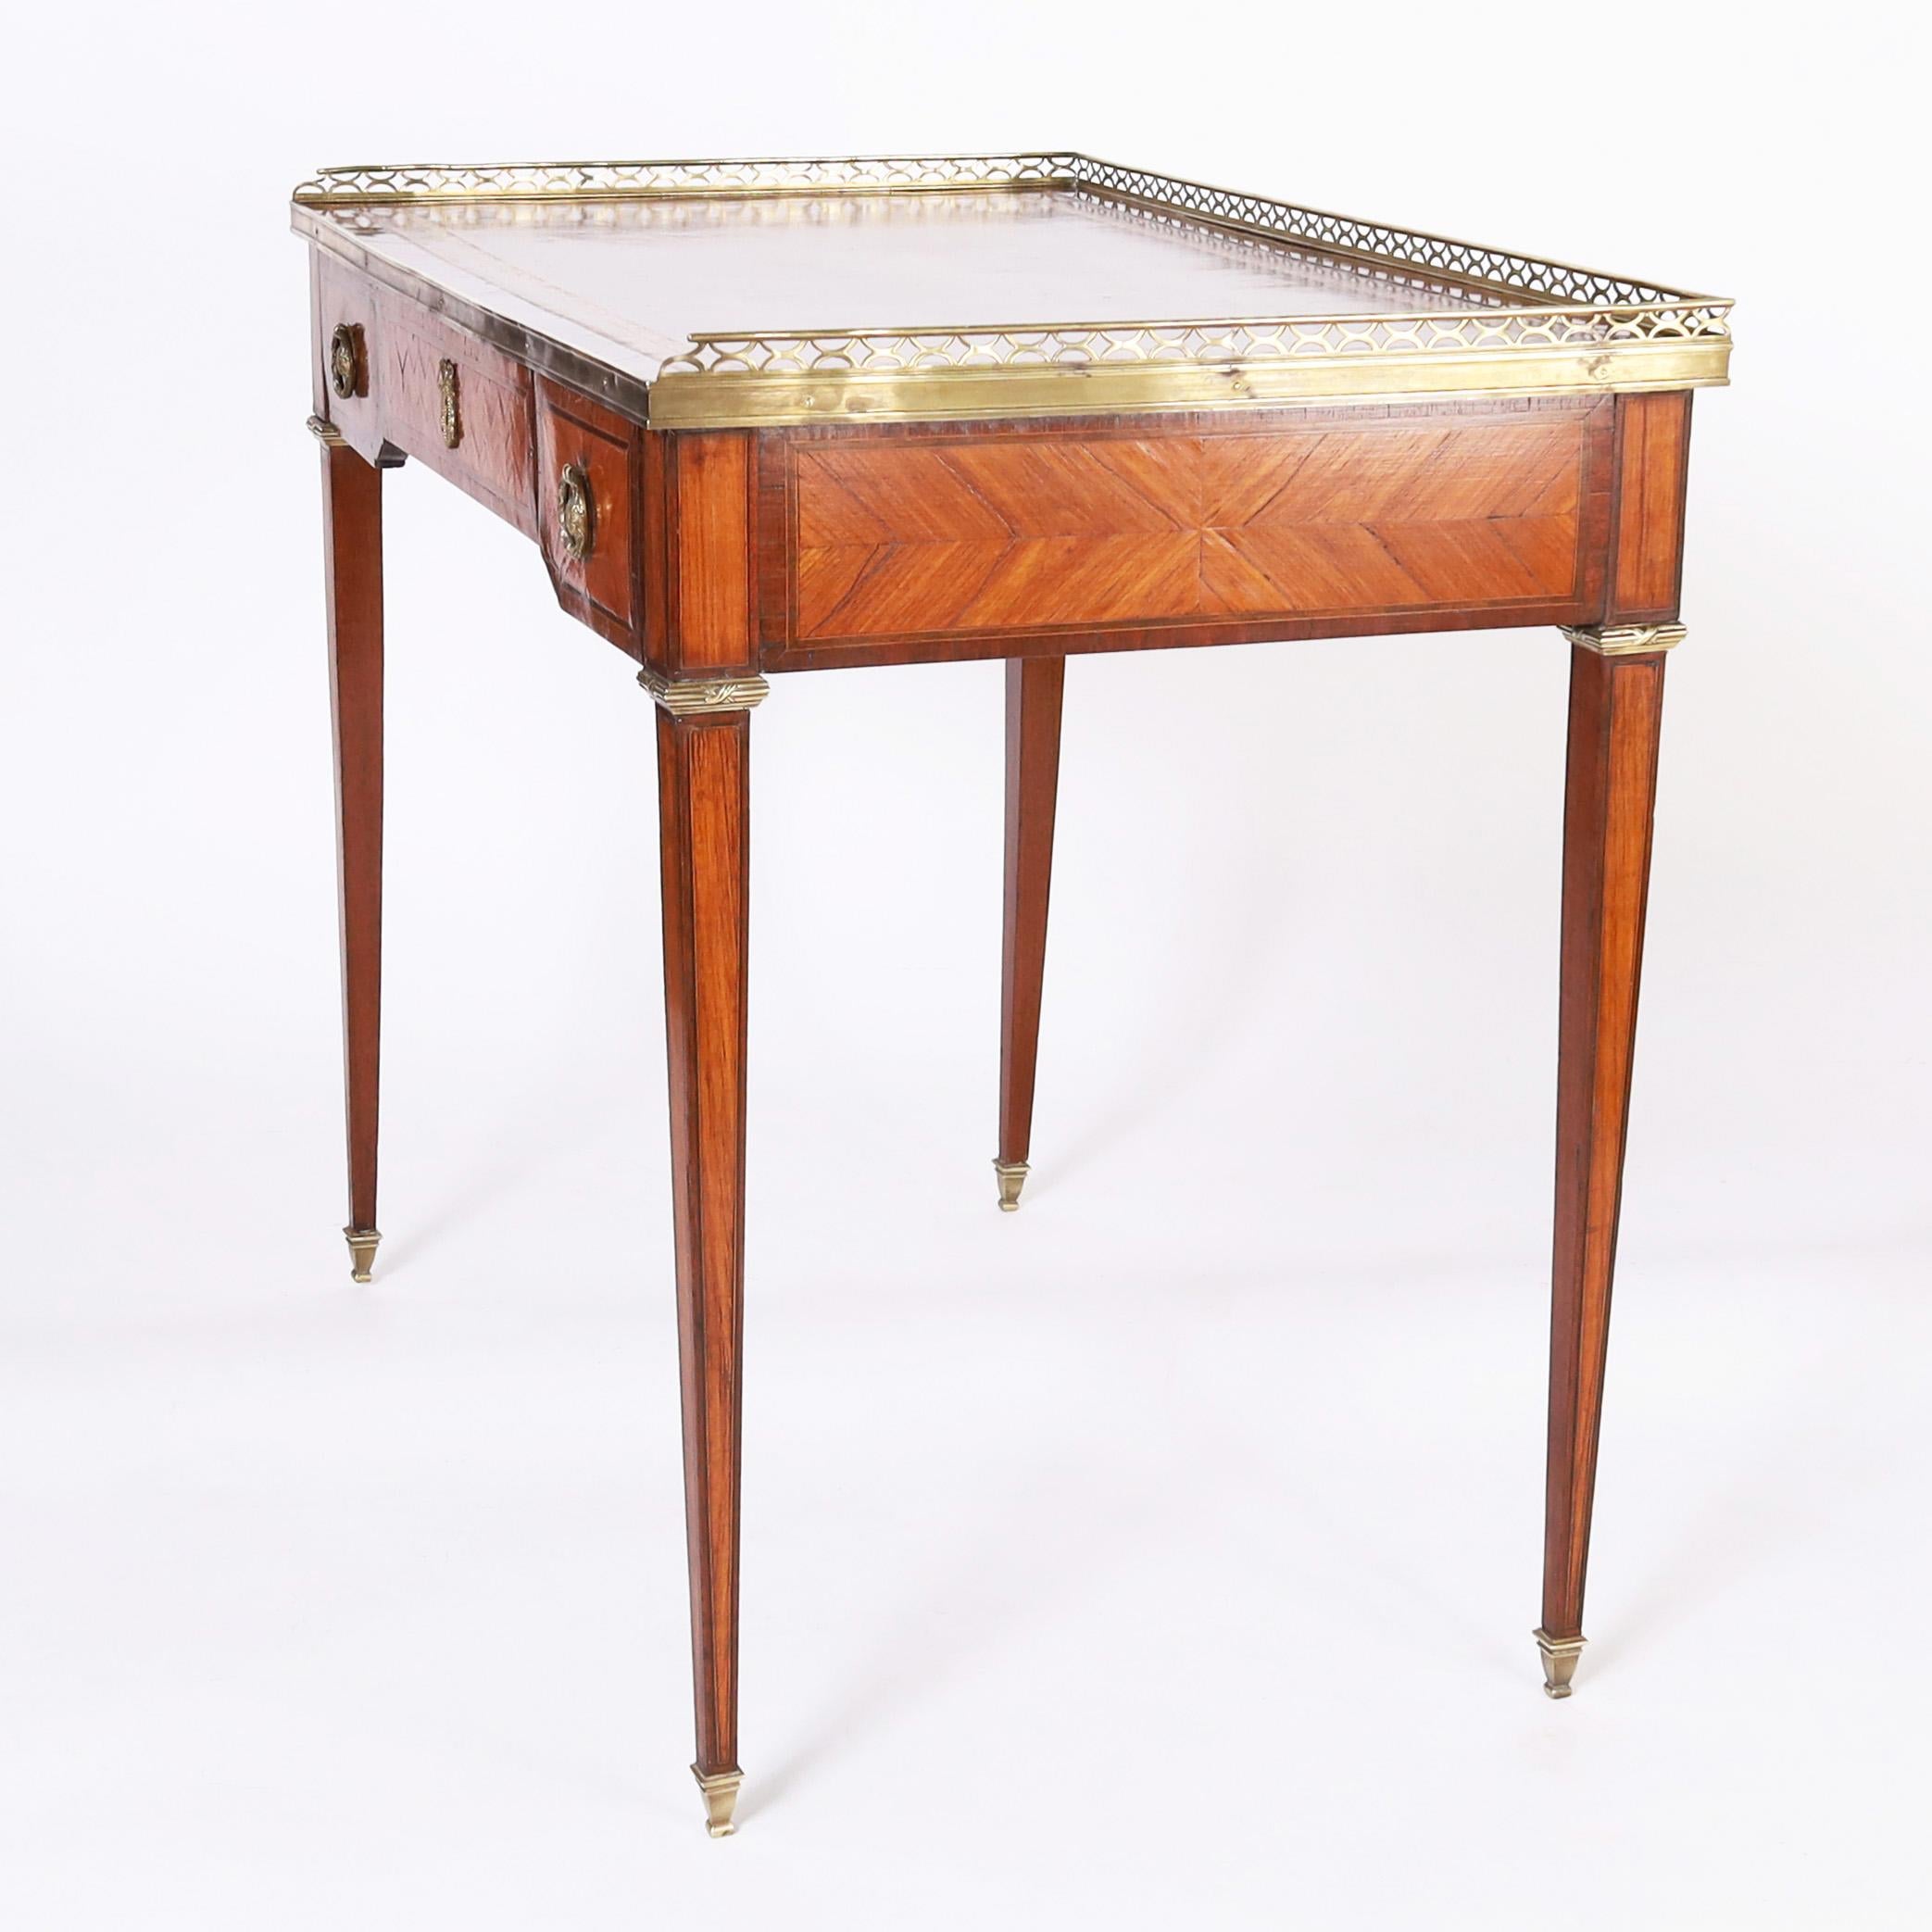 Antique French Louis XVI Style Leather Top Writing Desk In Good Condition For Sale In Palm Beach, FL